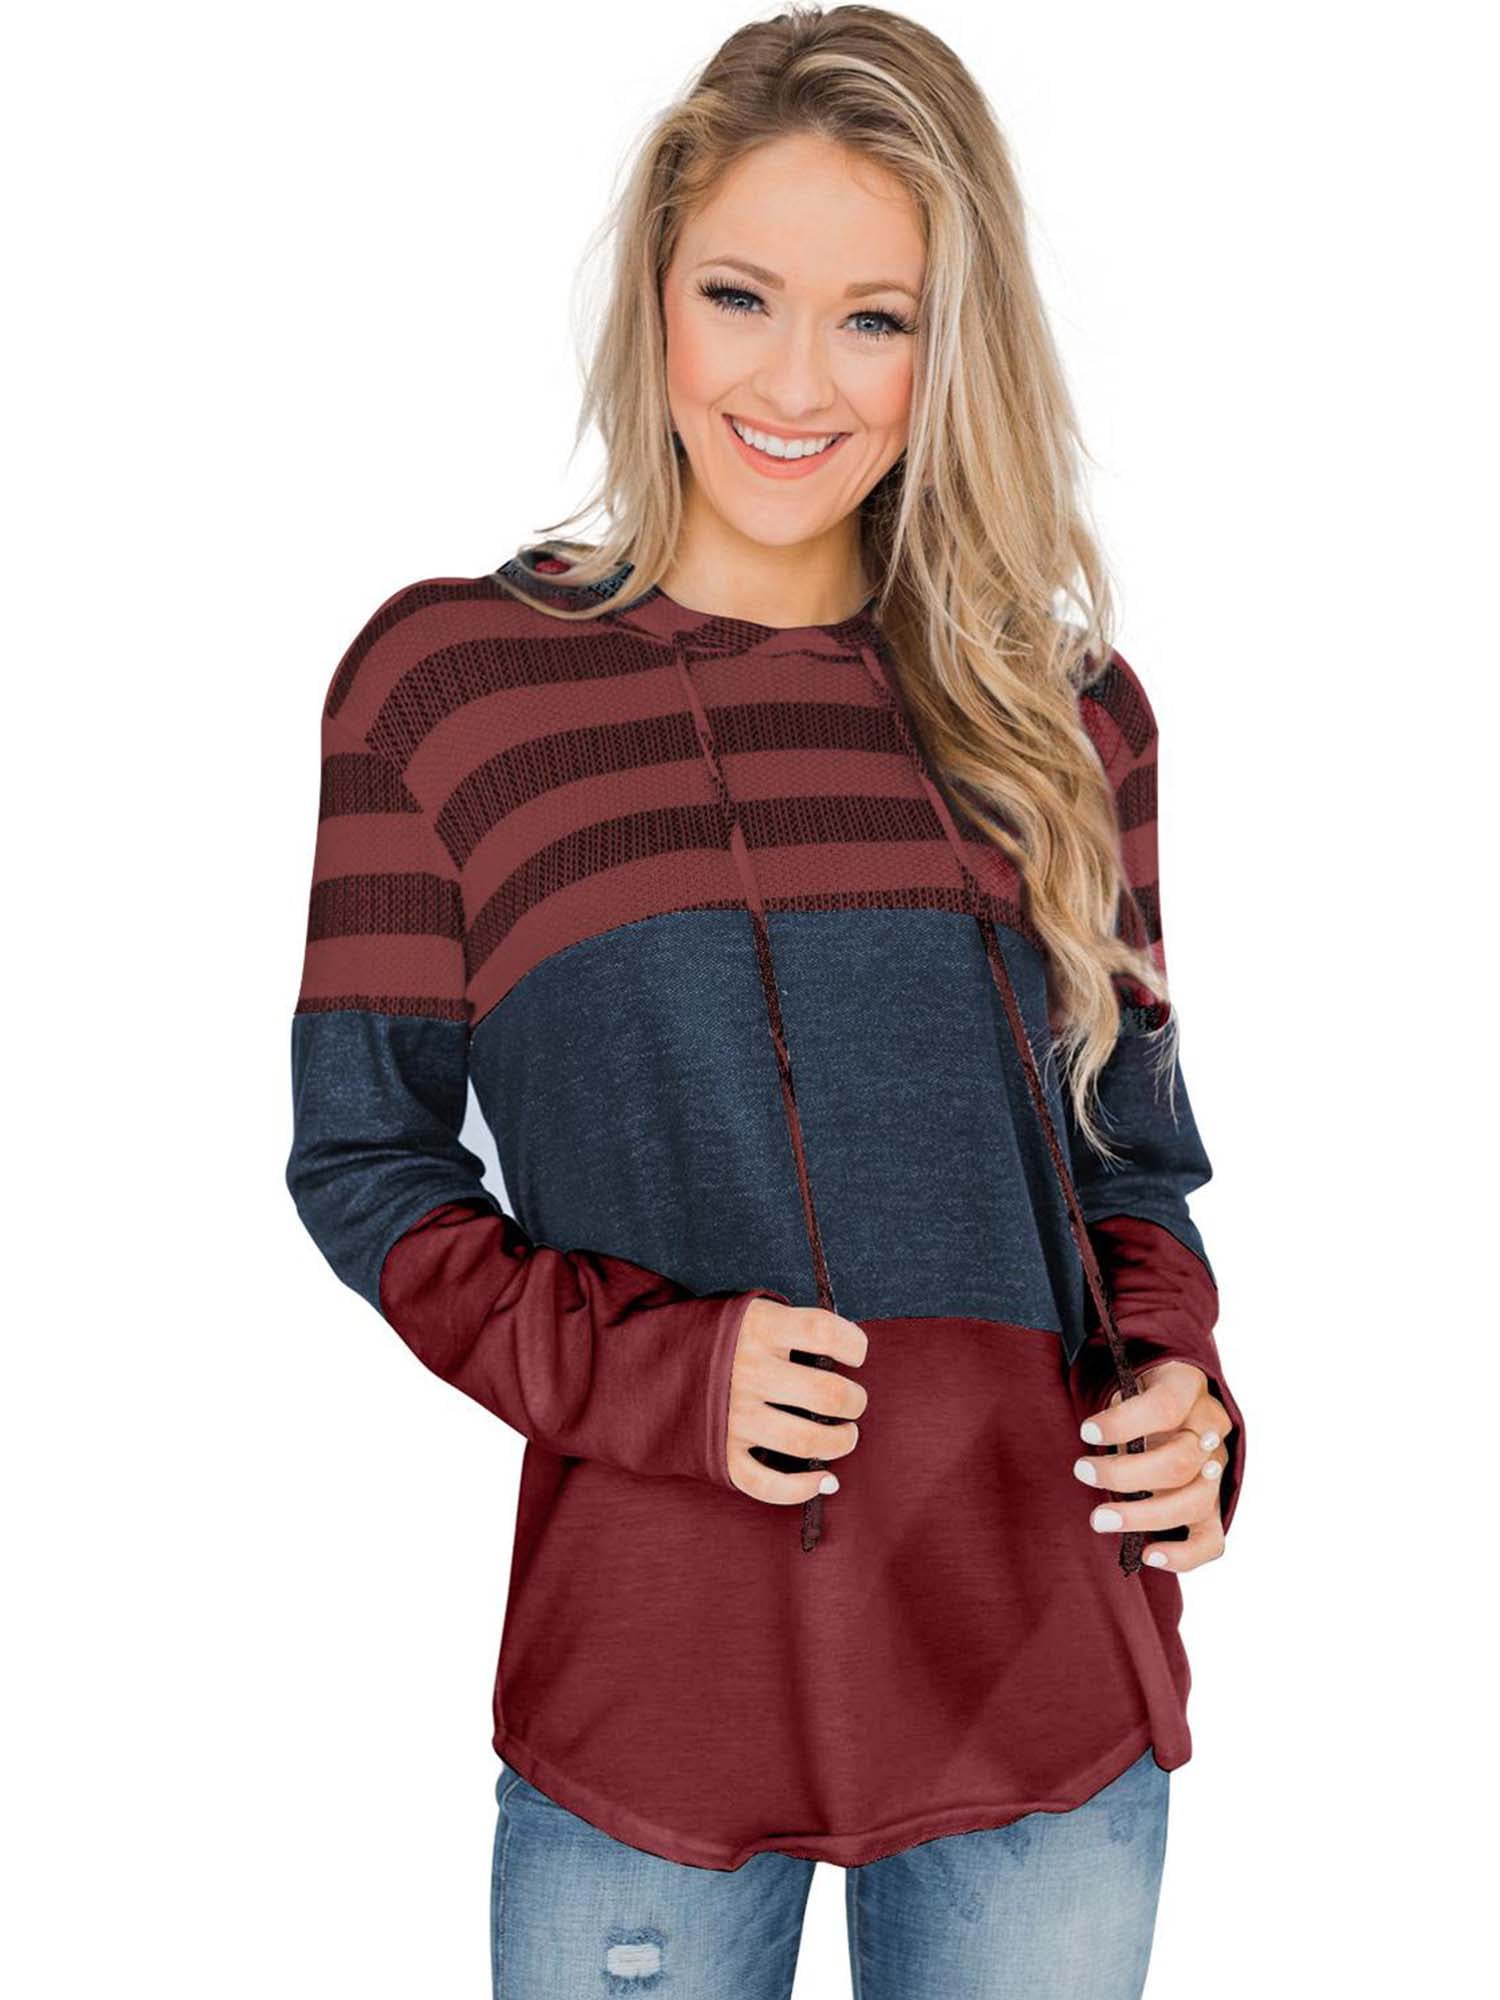 Swarovo - Women's Red Long Sleeve Hoodie Pullover Tops Casual Loose ...